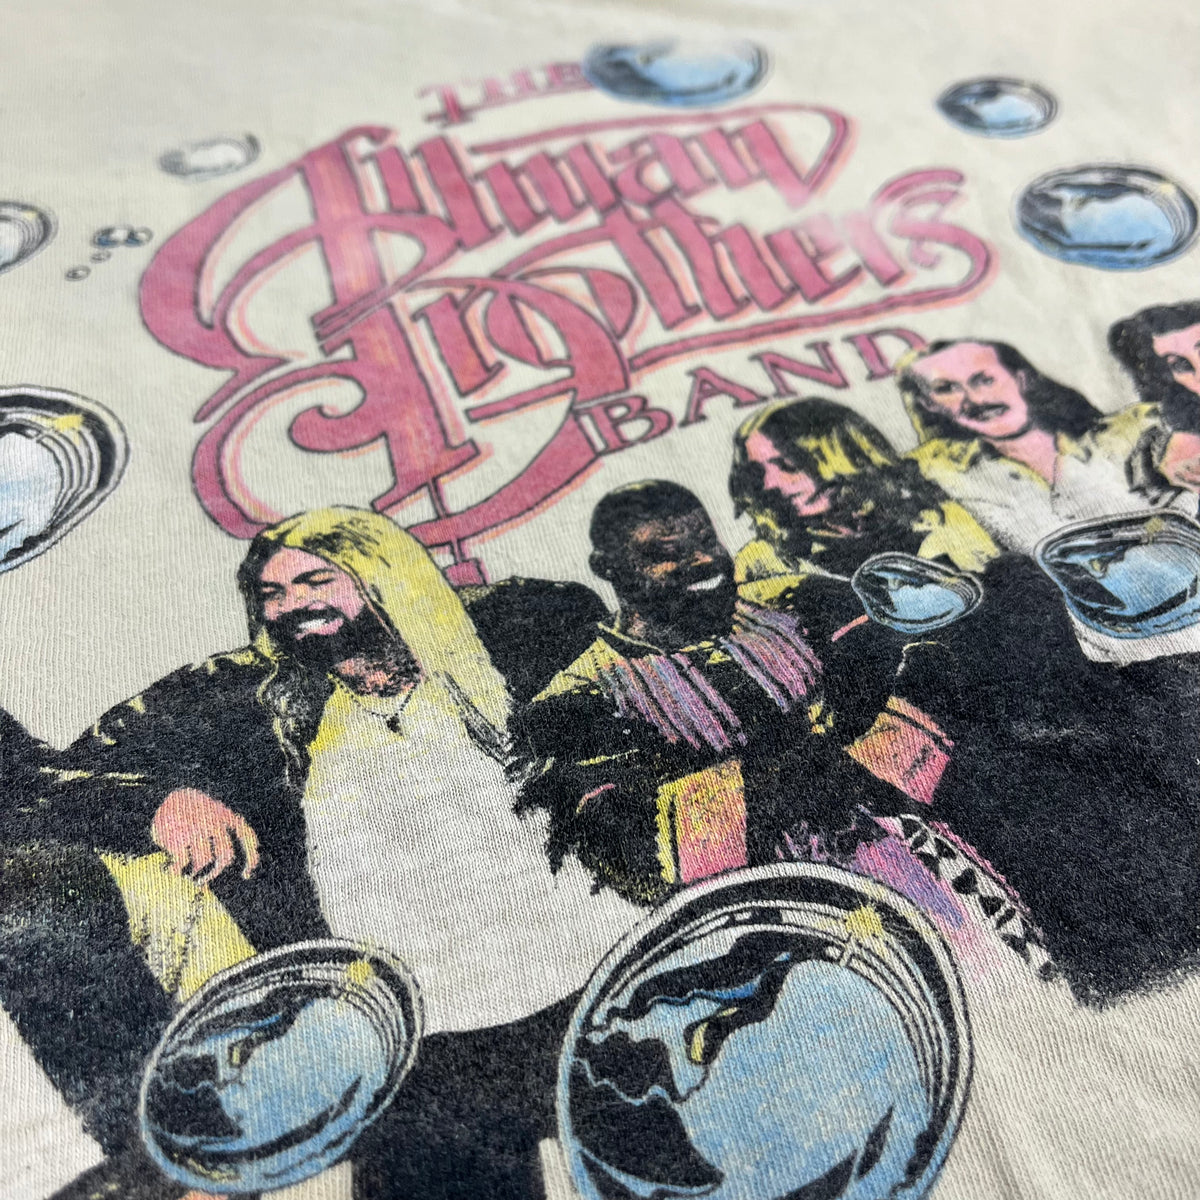 Vintage The Allman Brothers Band &quot;Enlightened Rogues&quot; T-Shirt